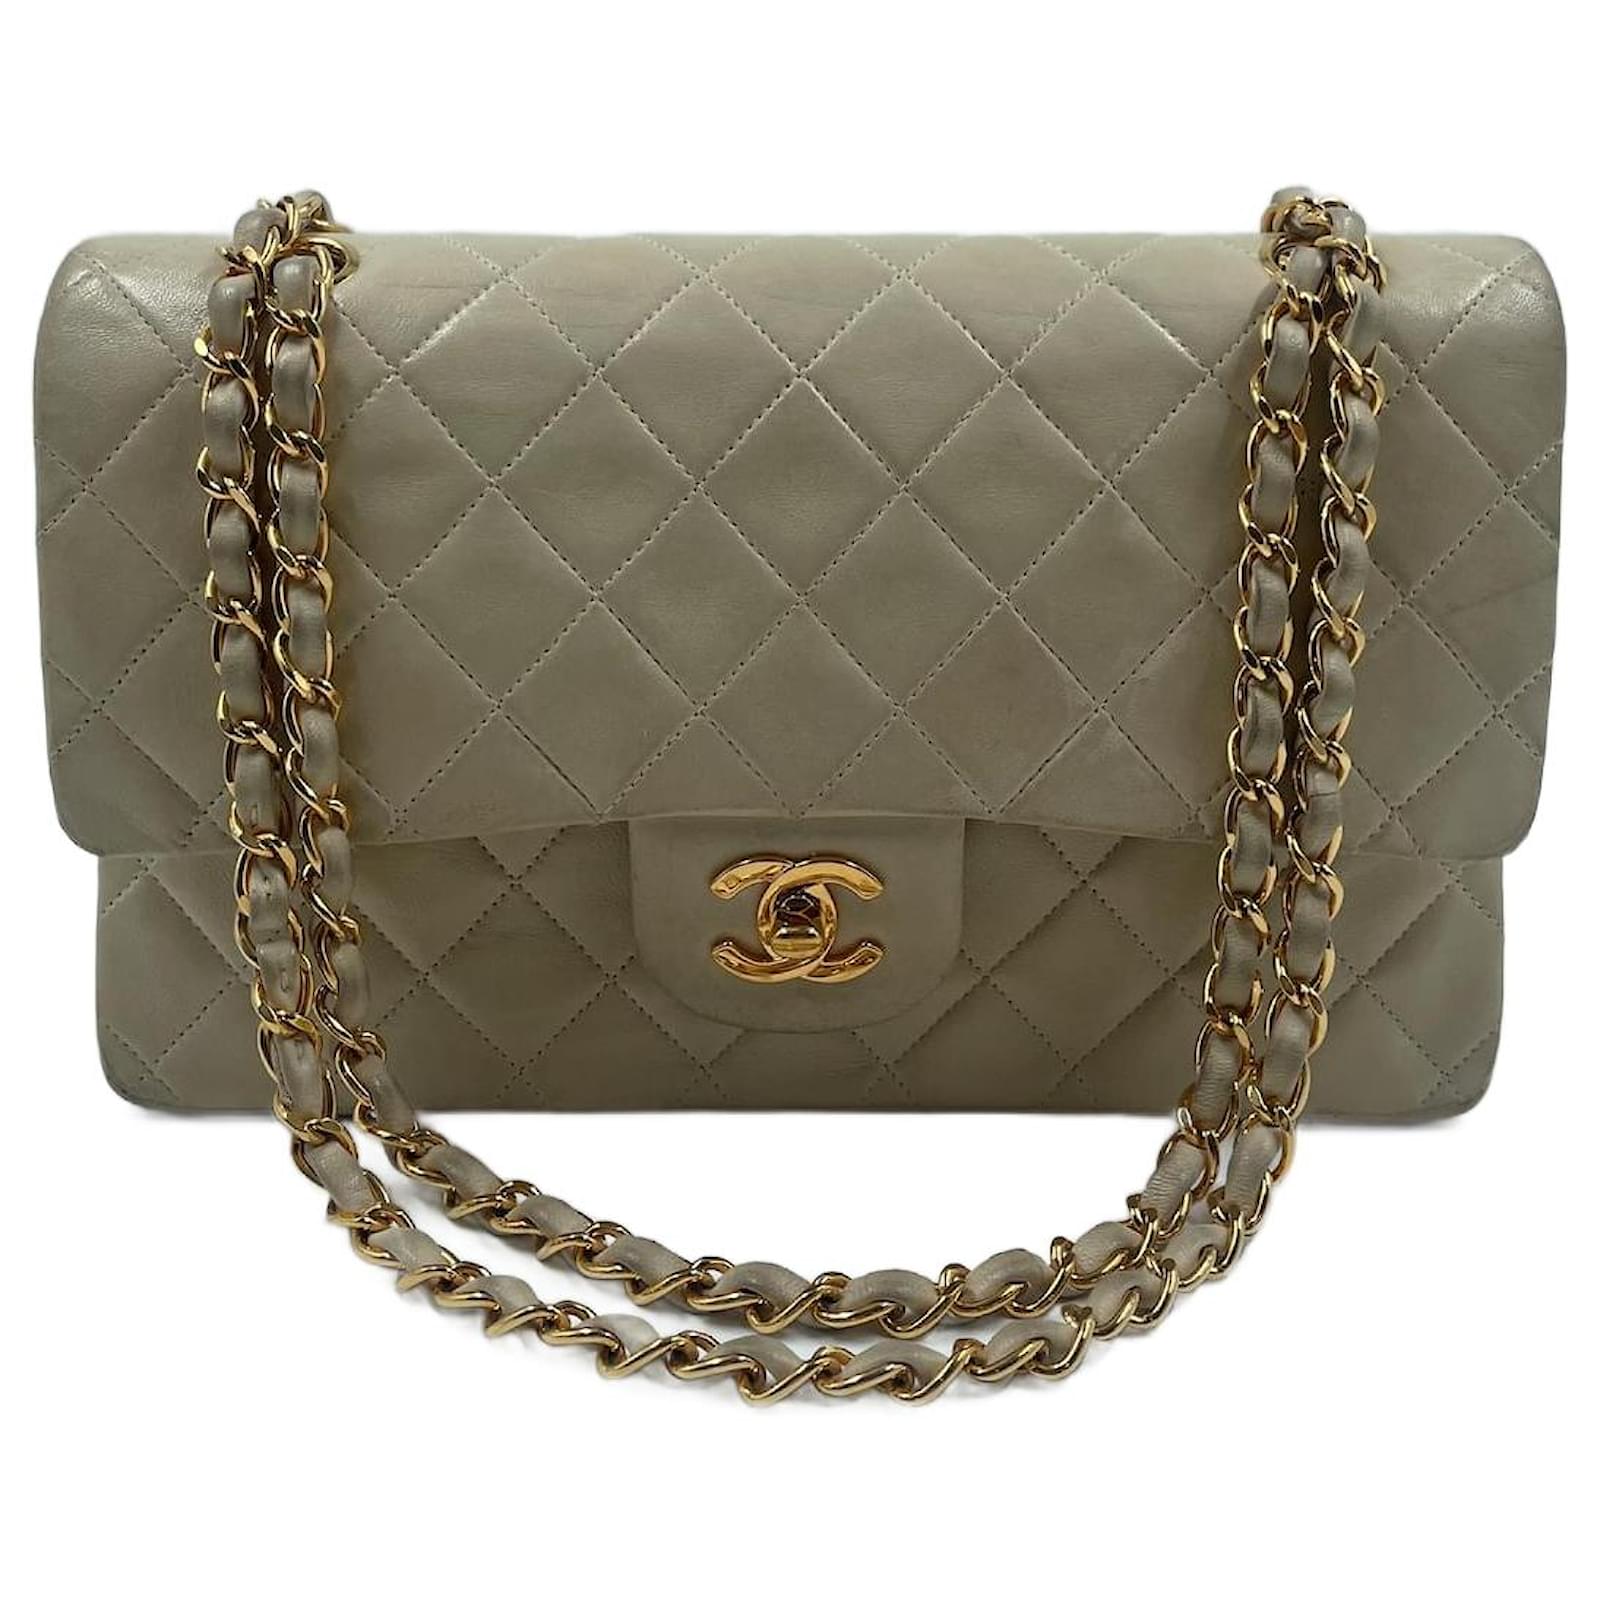 Chanel Rock in Moscow Grey Abstract Print Nylon Accordion Flap Bag